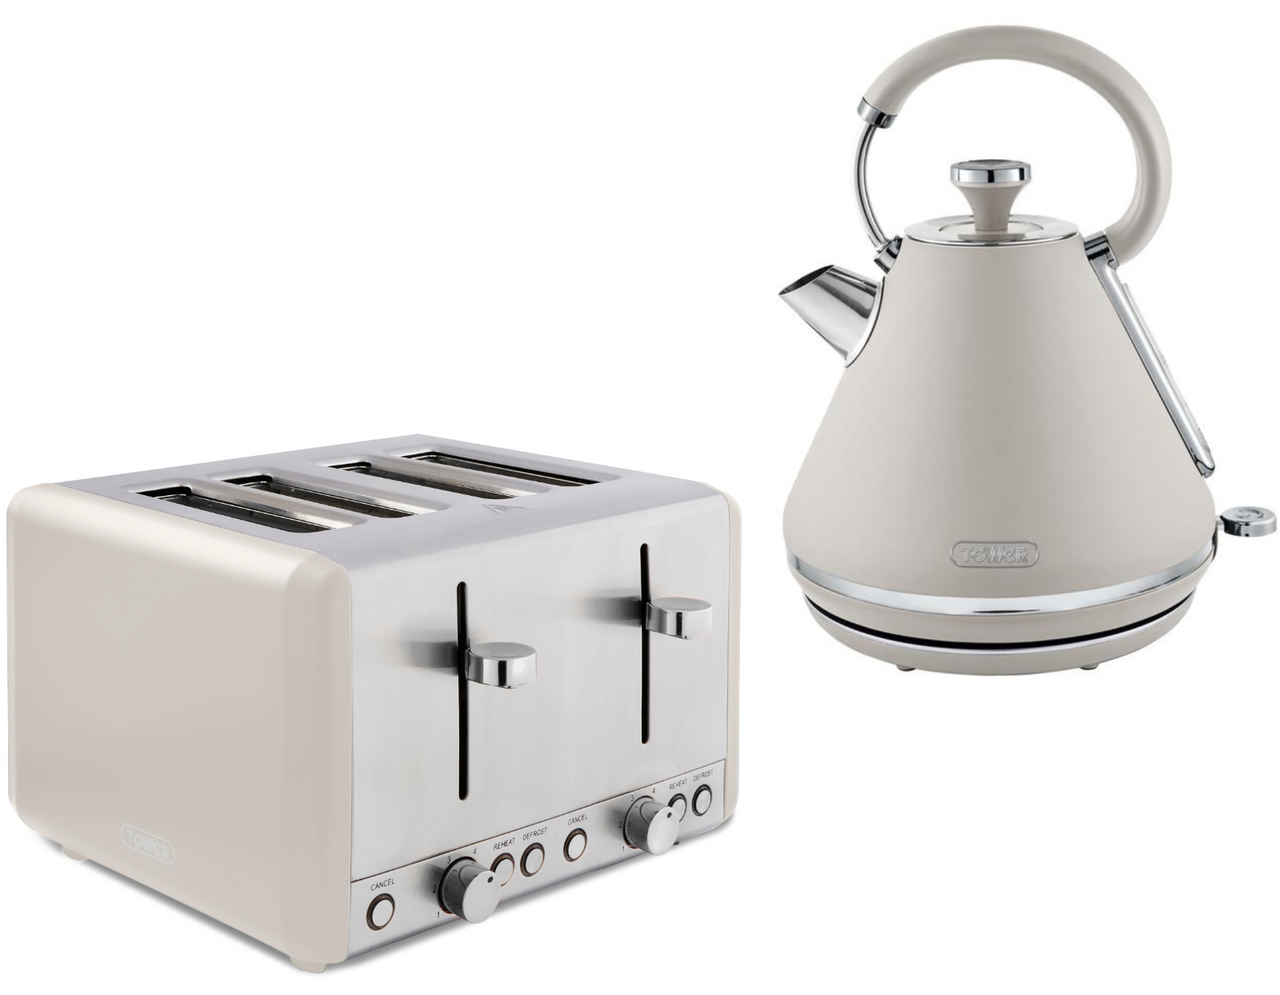 Tower Cavaletto Pyramid Kettle & 4 Slice Toaster Latte with Chrome Accents